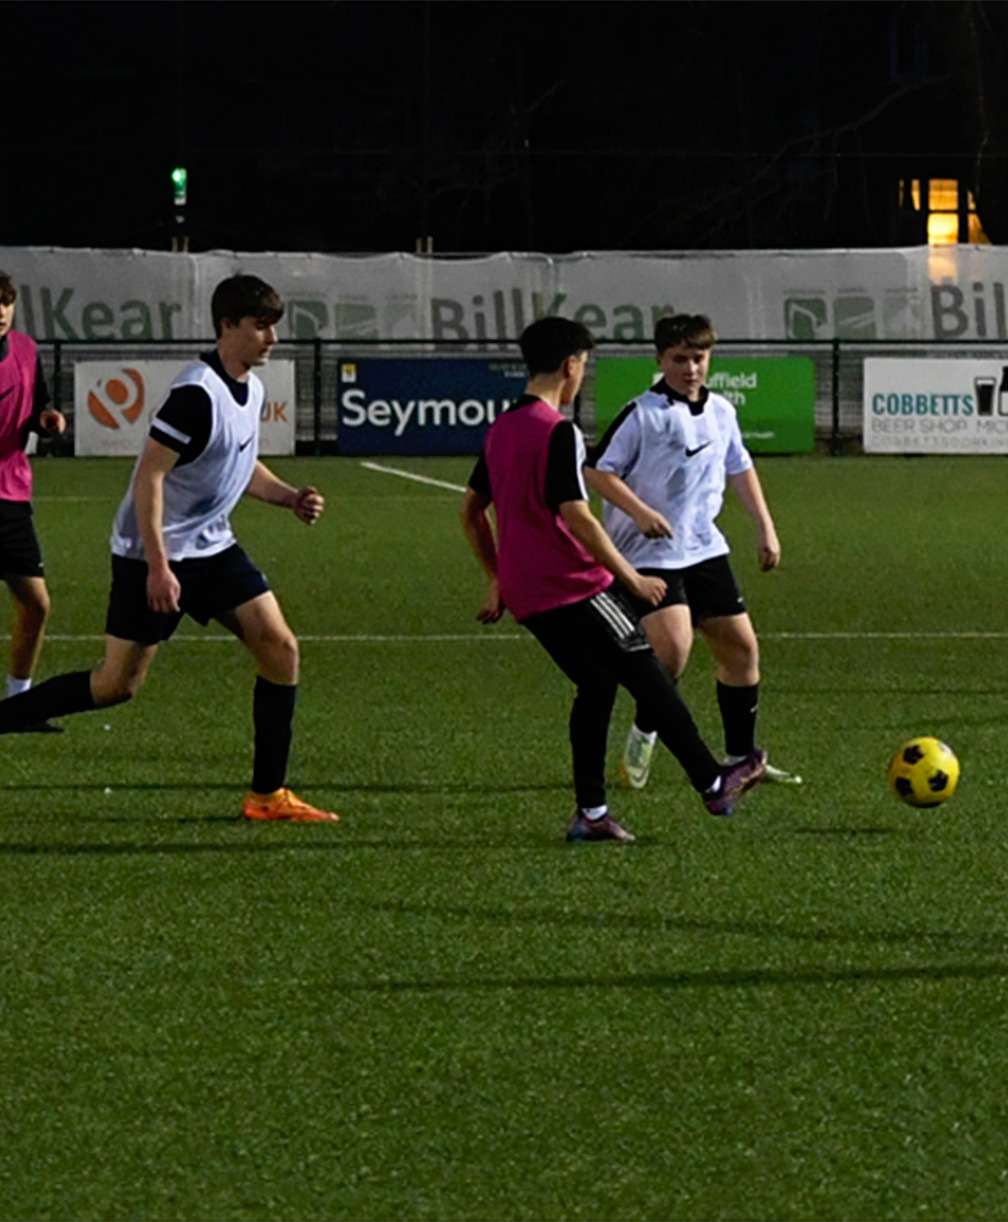 A group of players taking part in a passing practice in training.